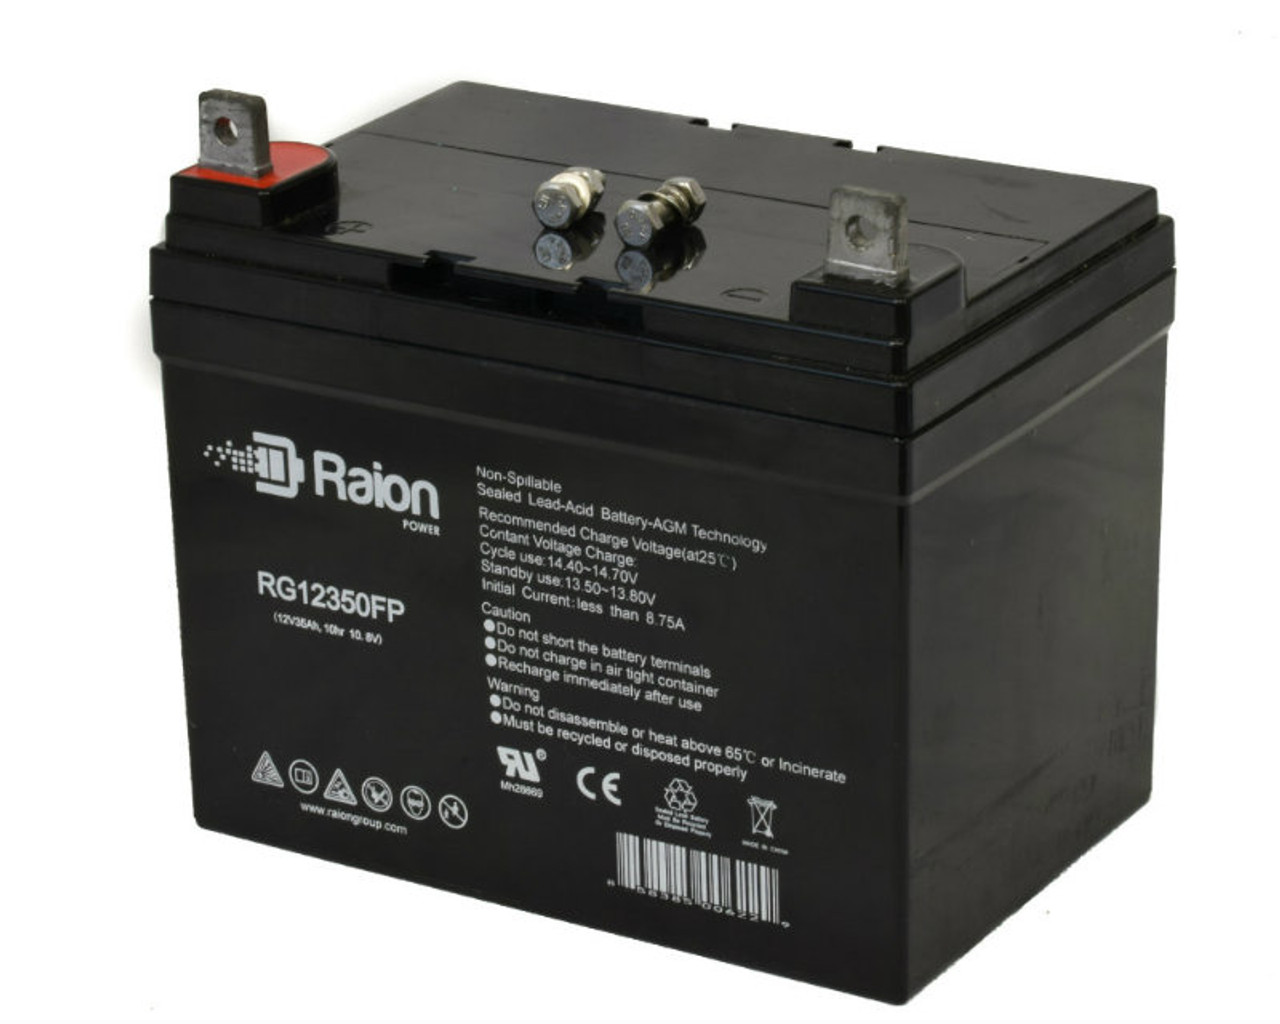 Raion Power Replacement 12V 35Ah RG12350FP Battery for LongWay 6FM35AG